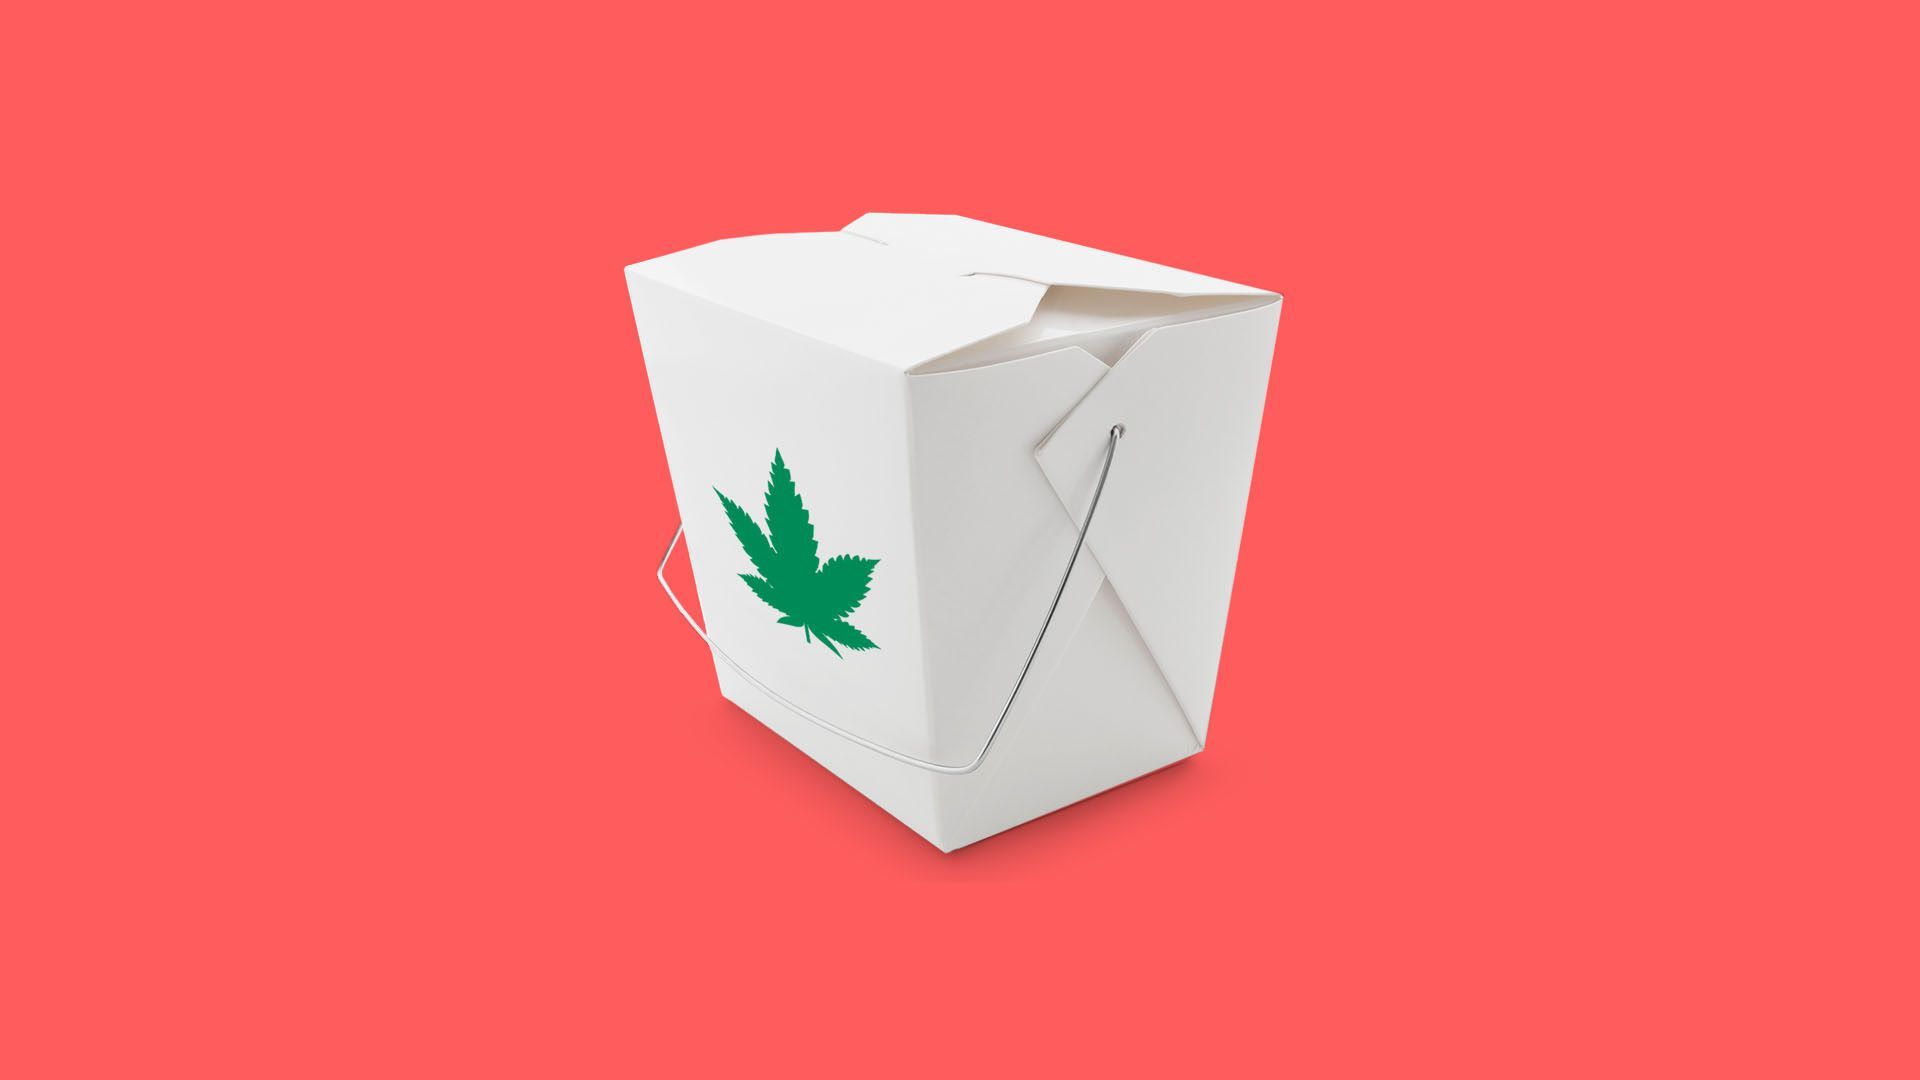 Illustration of a cannabis leaf on the side of a takeout box. 